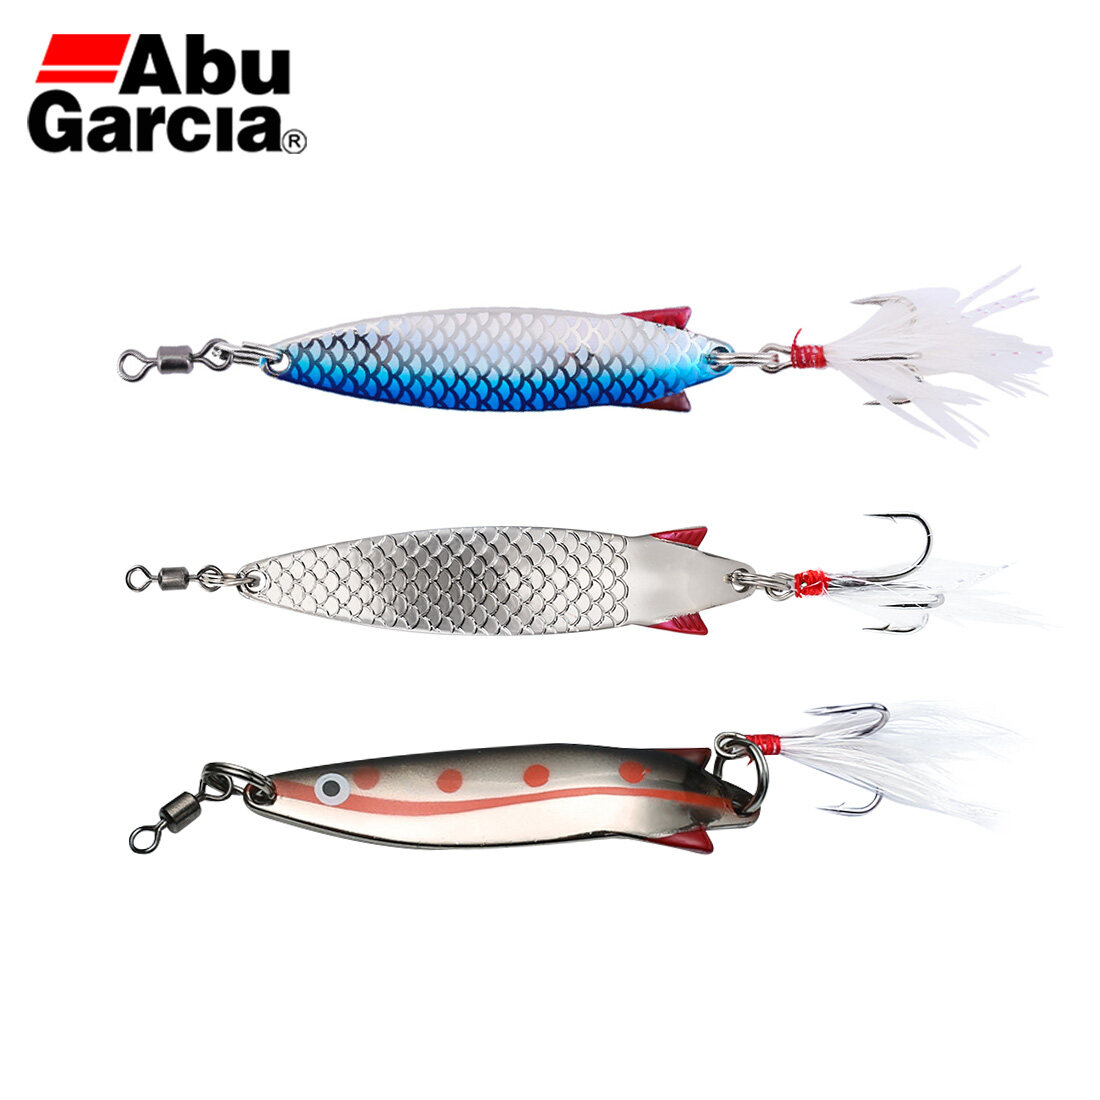 Black Box 5 Vintage Abu Garcia Spinners 2 Droppen and 3 Jungle Fishing Lures 